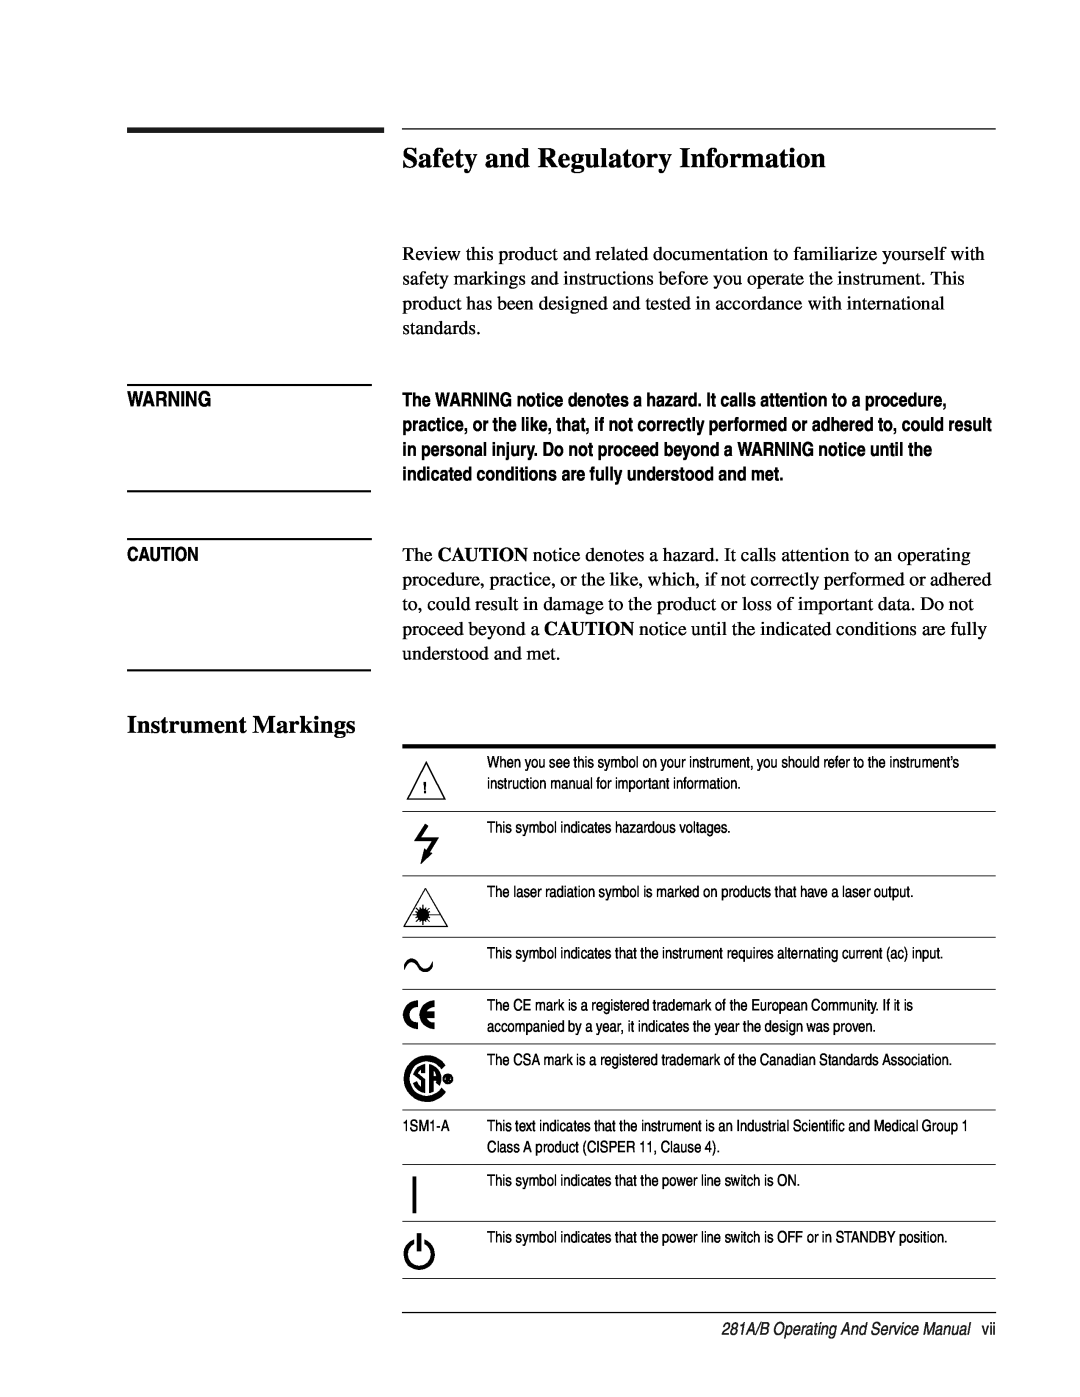 Agilent Technologies 281 A, B service manual Safety and Regulatory Information, Instrument Markings 